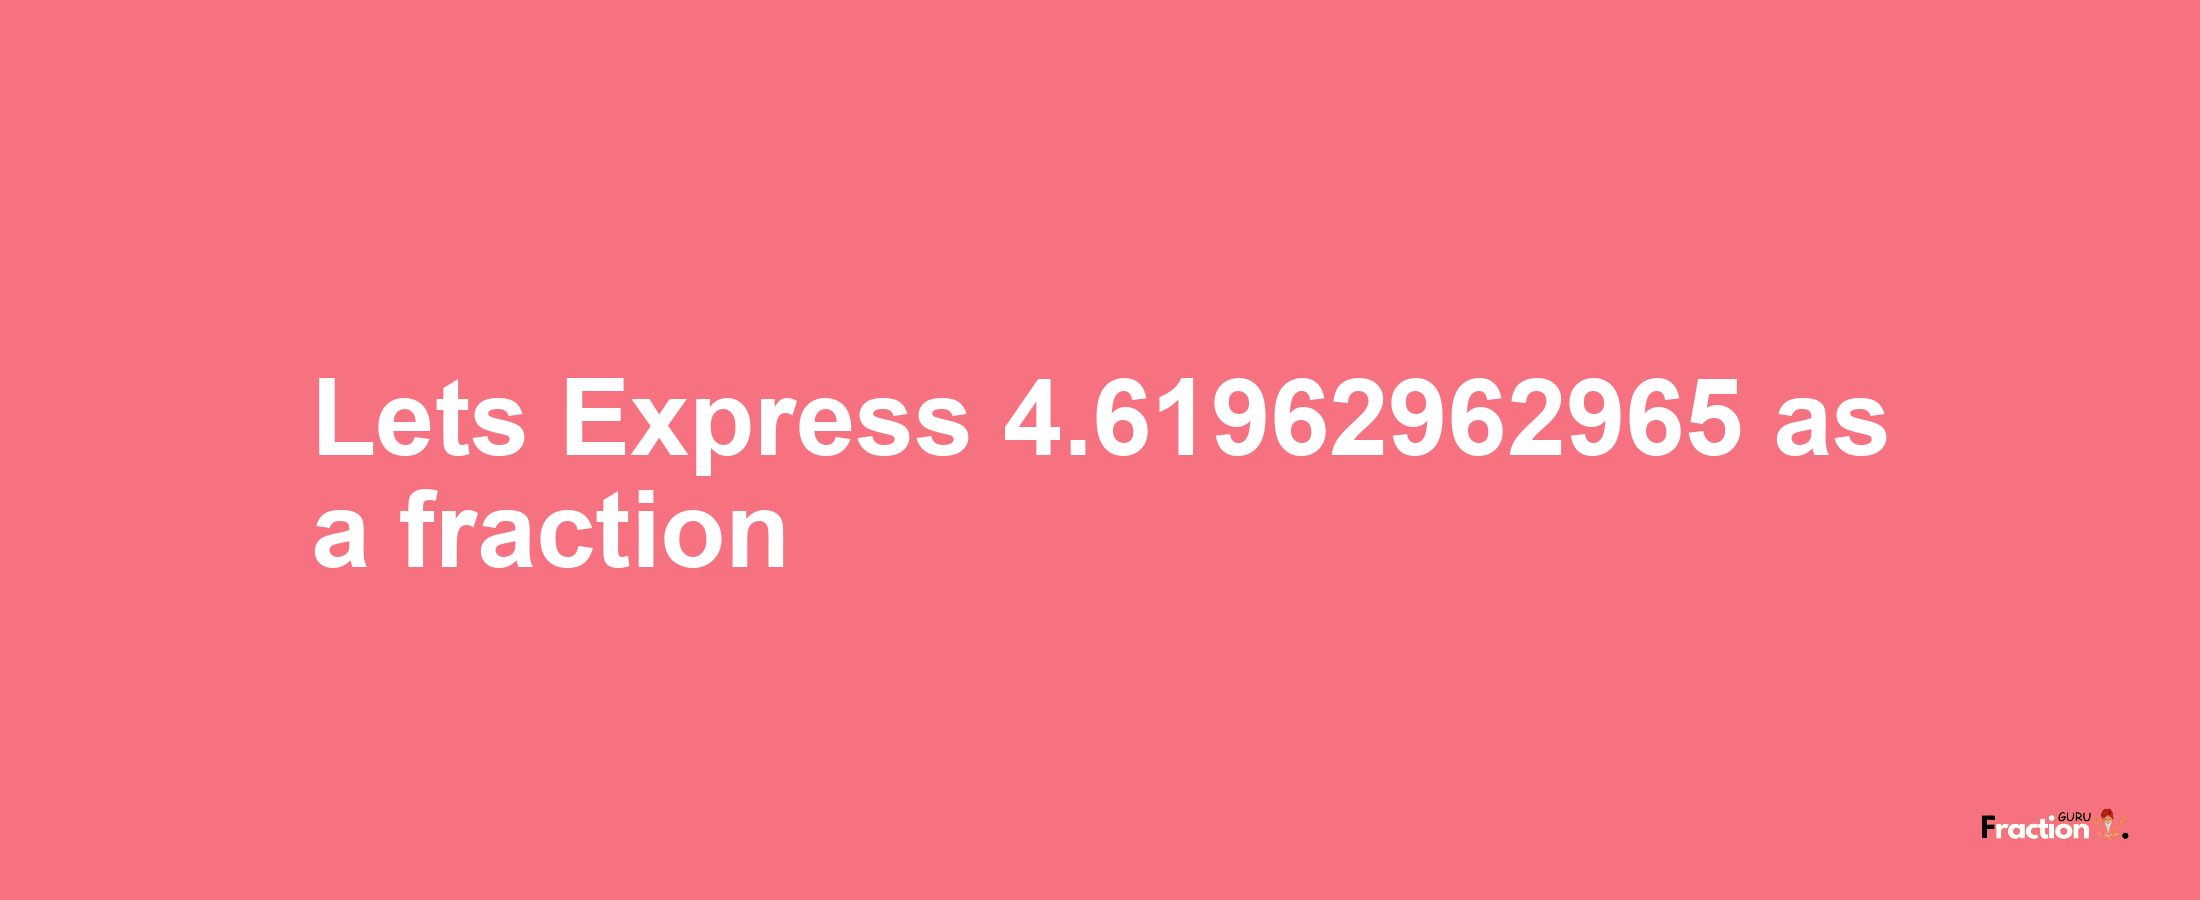 Lets Express 4.61962962965 as afraction